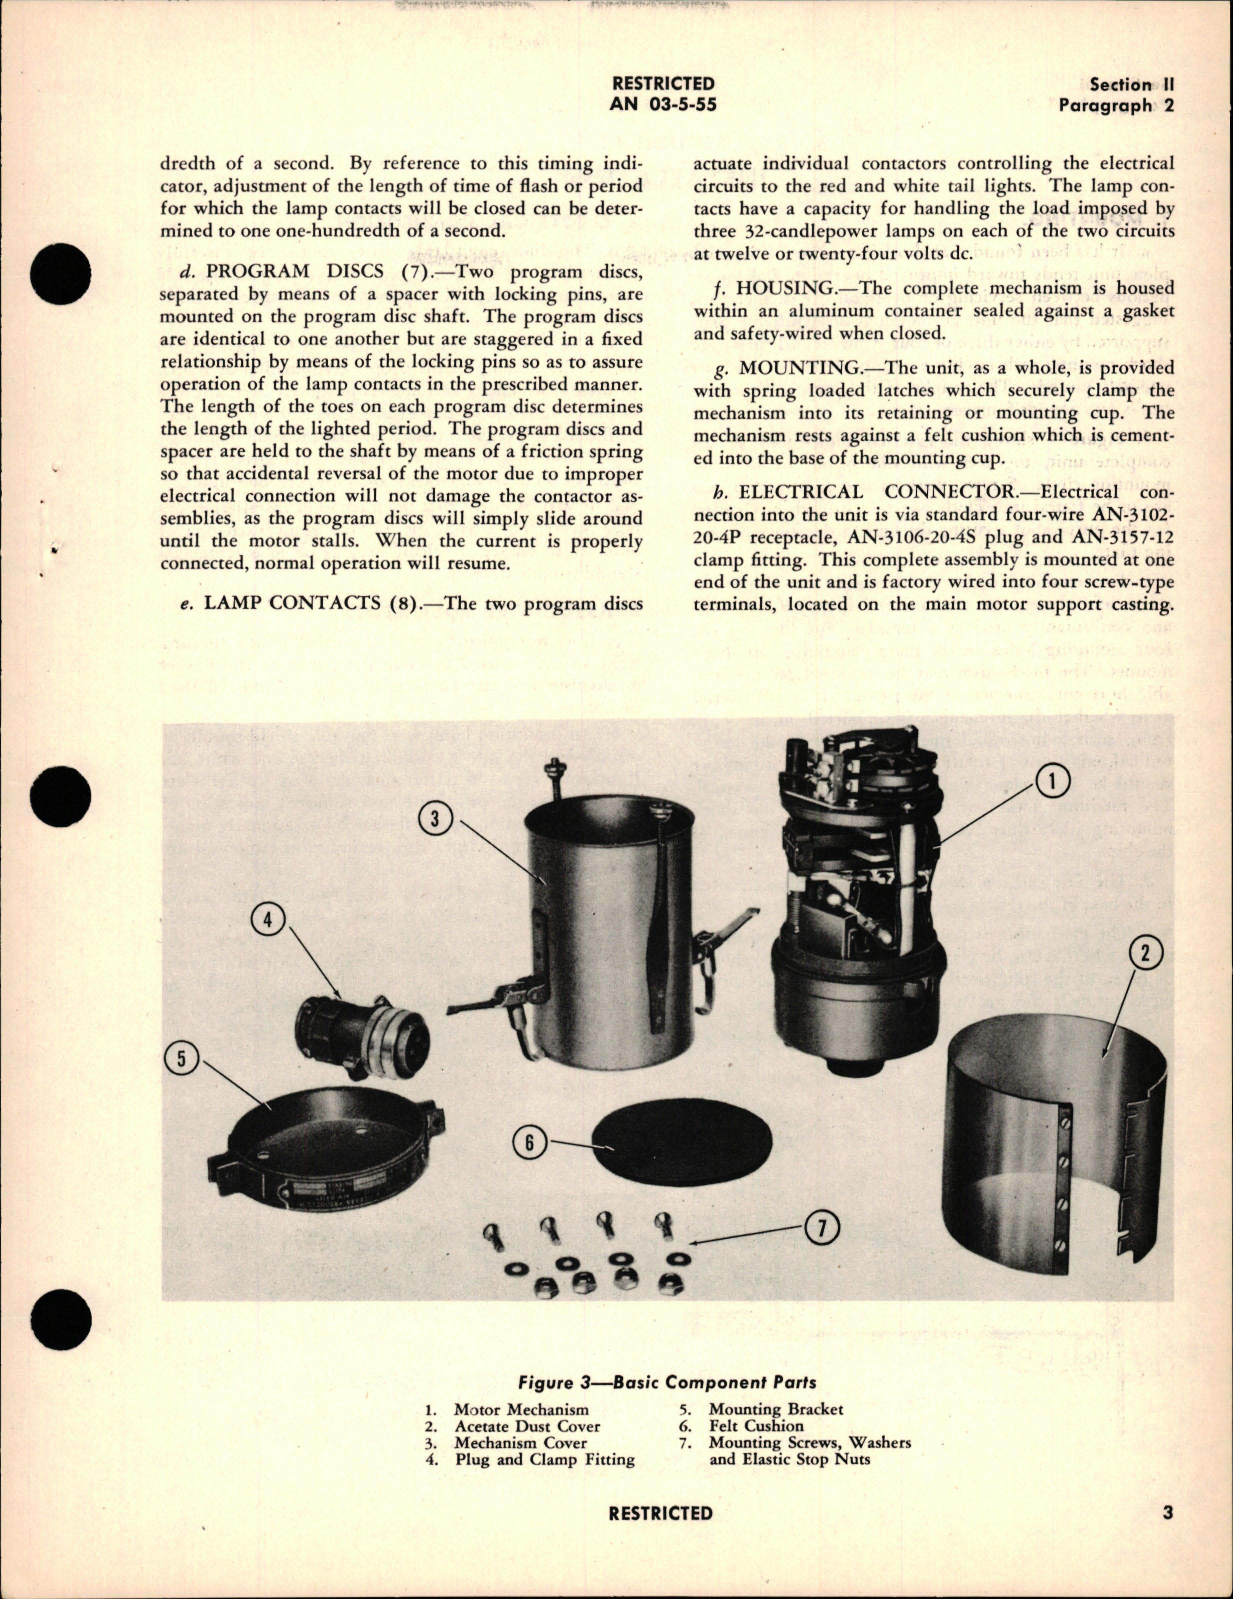 Sample page 7 from AirCorps Library document: Instructions with Parts Catalog for Aircraft Flasher Mechanism - Types FA-121 and FA-122 